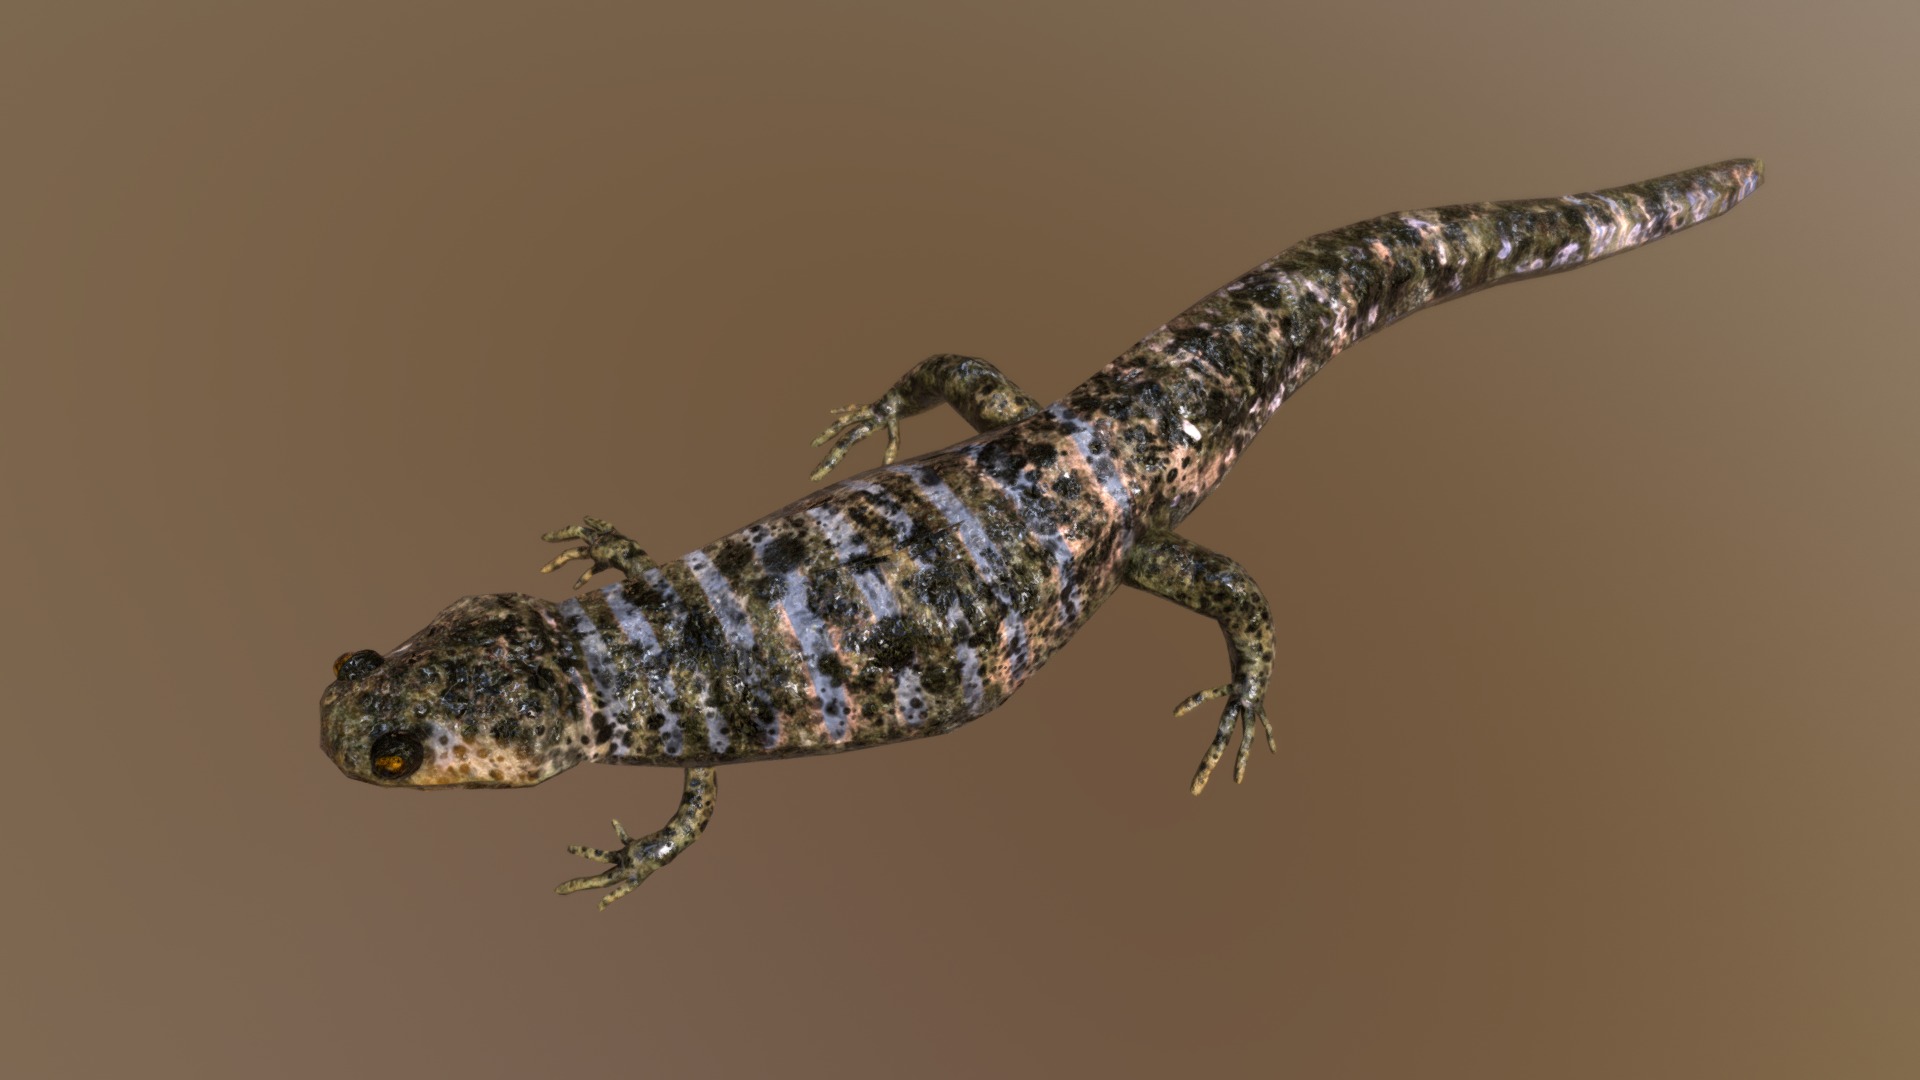 3D model Smooth Newt - This is a 3D model of the Smooth Newt. The 3D model is about a lizard on a branch.